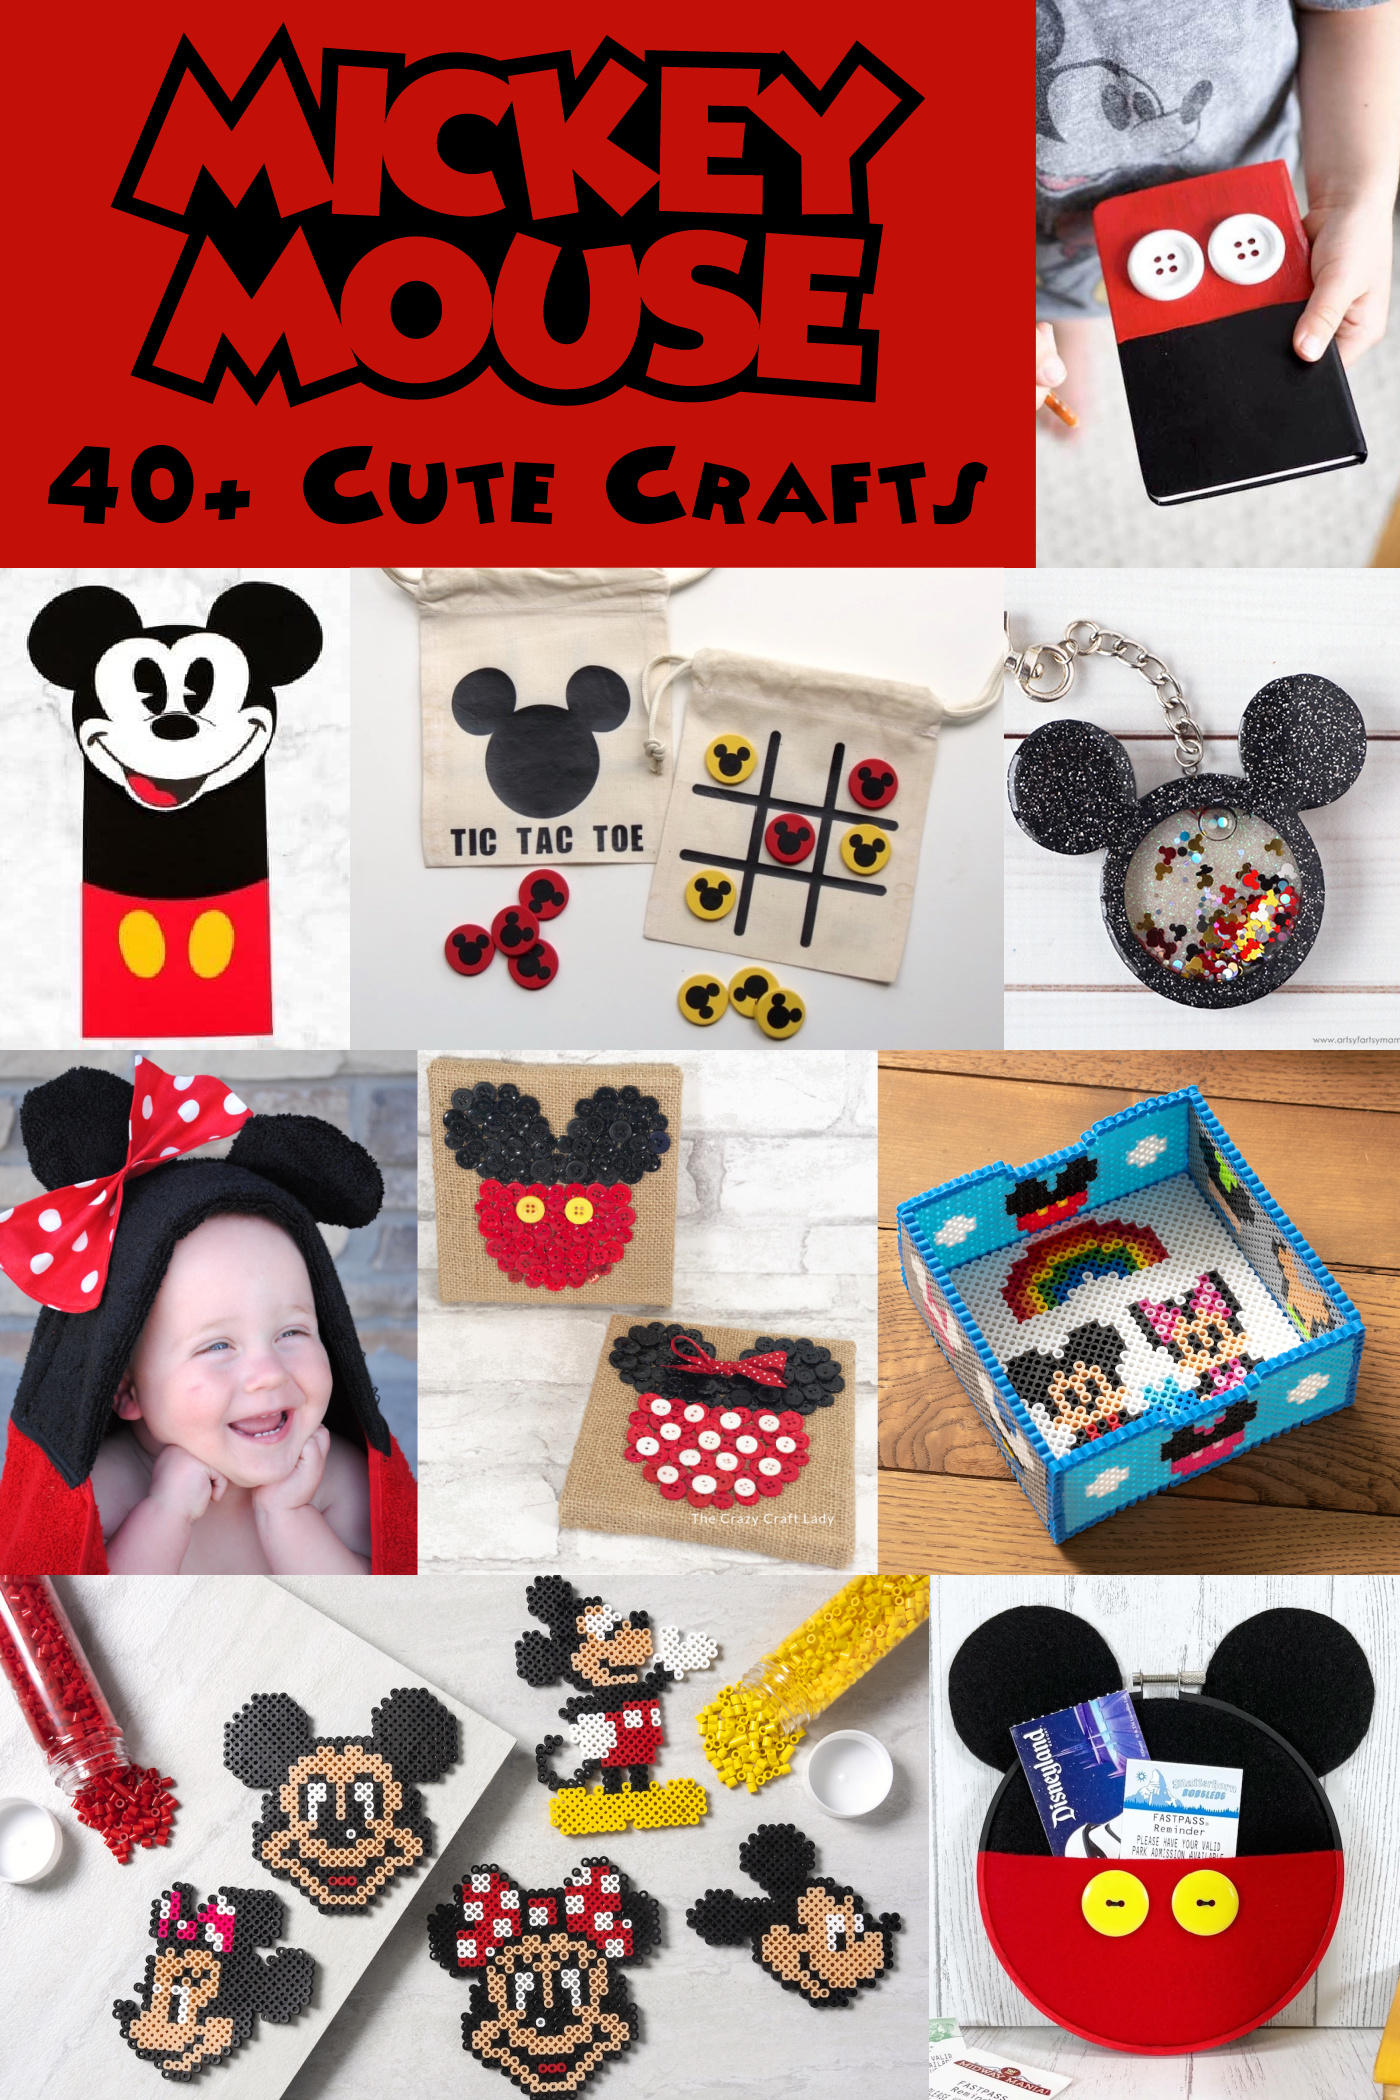 Mickey Mouse craft ideas